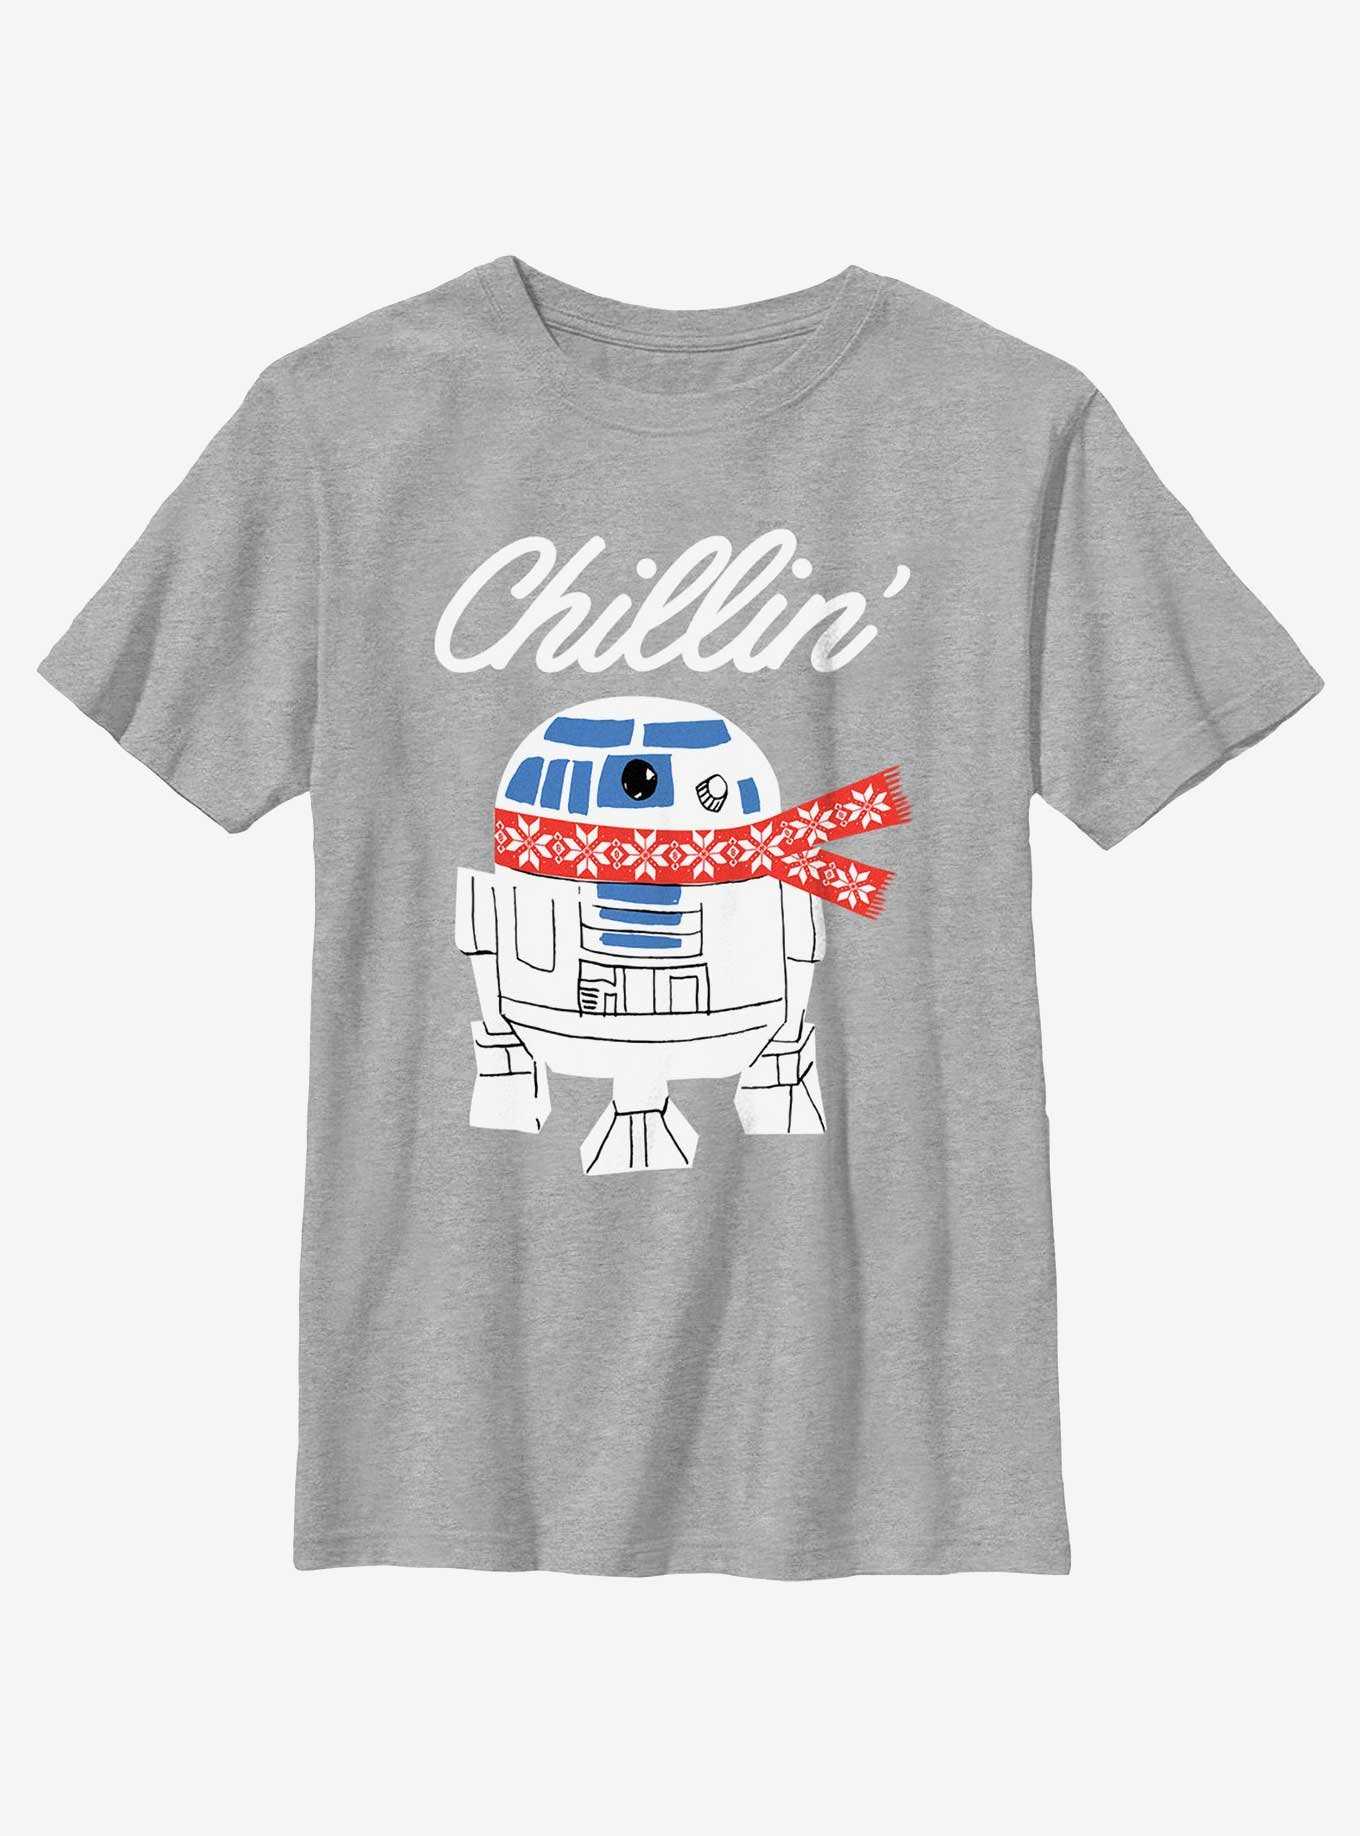 Star Wars R2-D2 Chillin' Youth T-Shirt, , hi-res